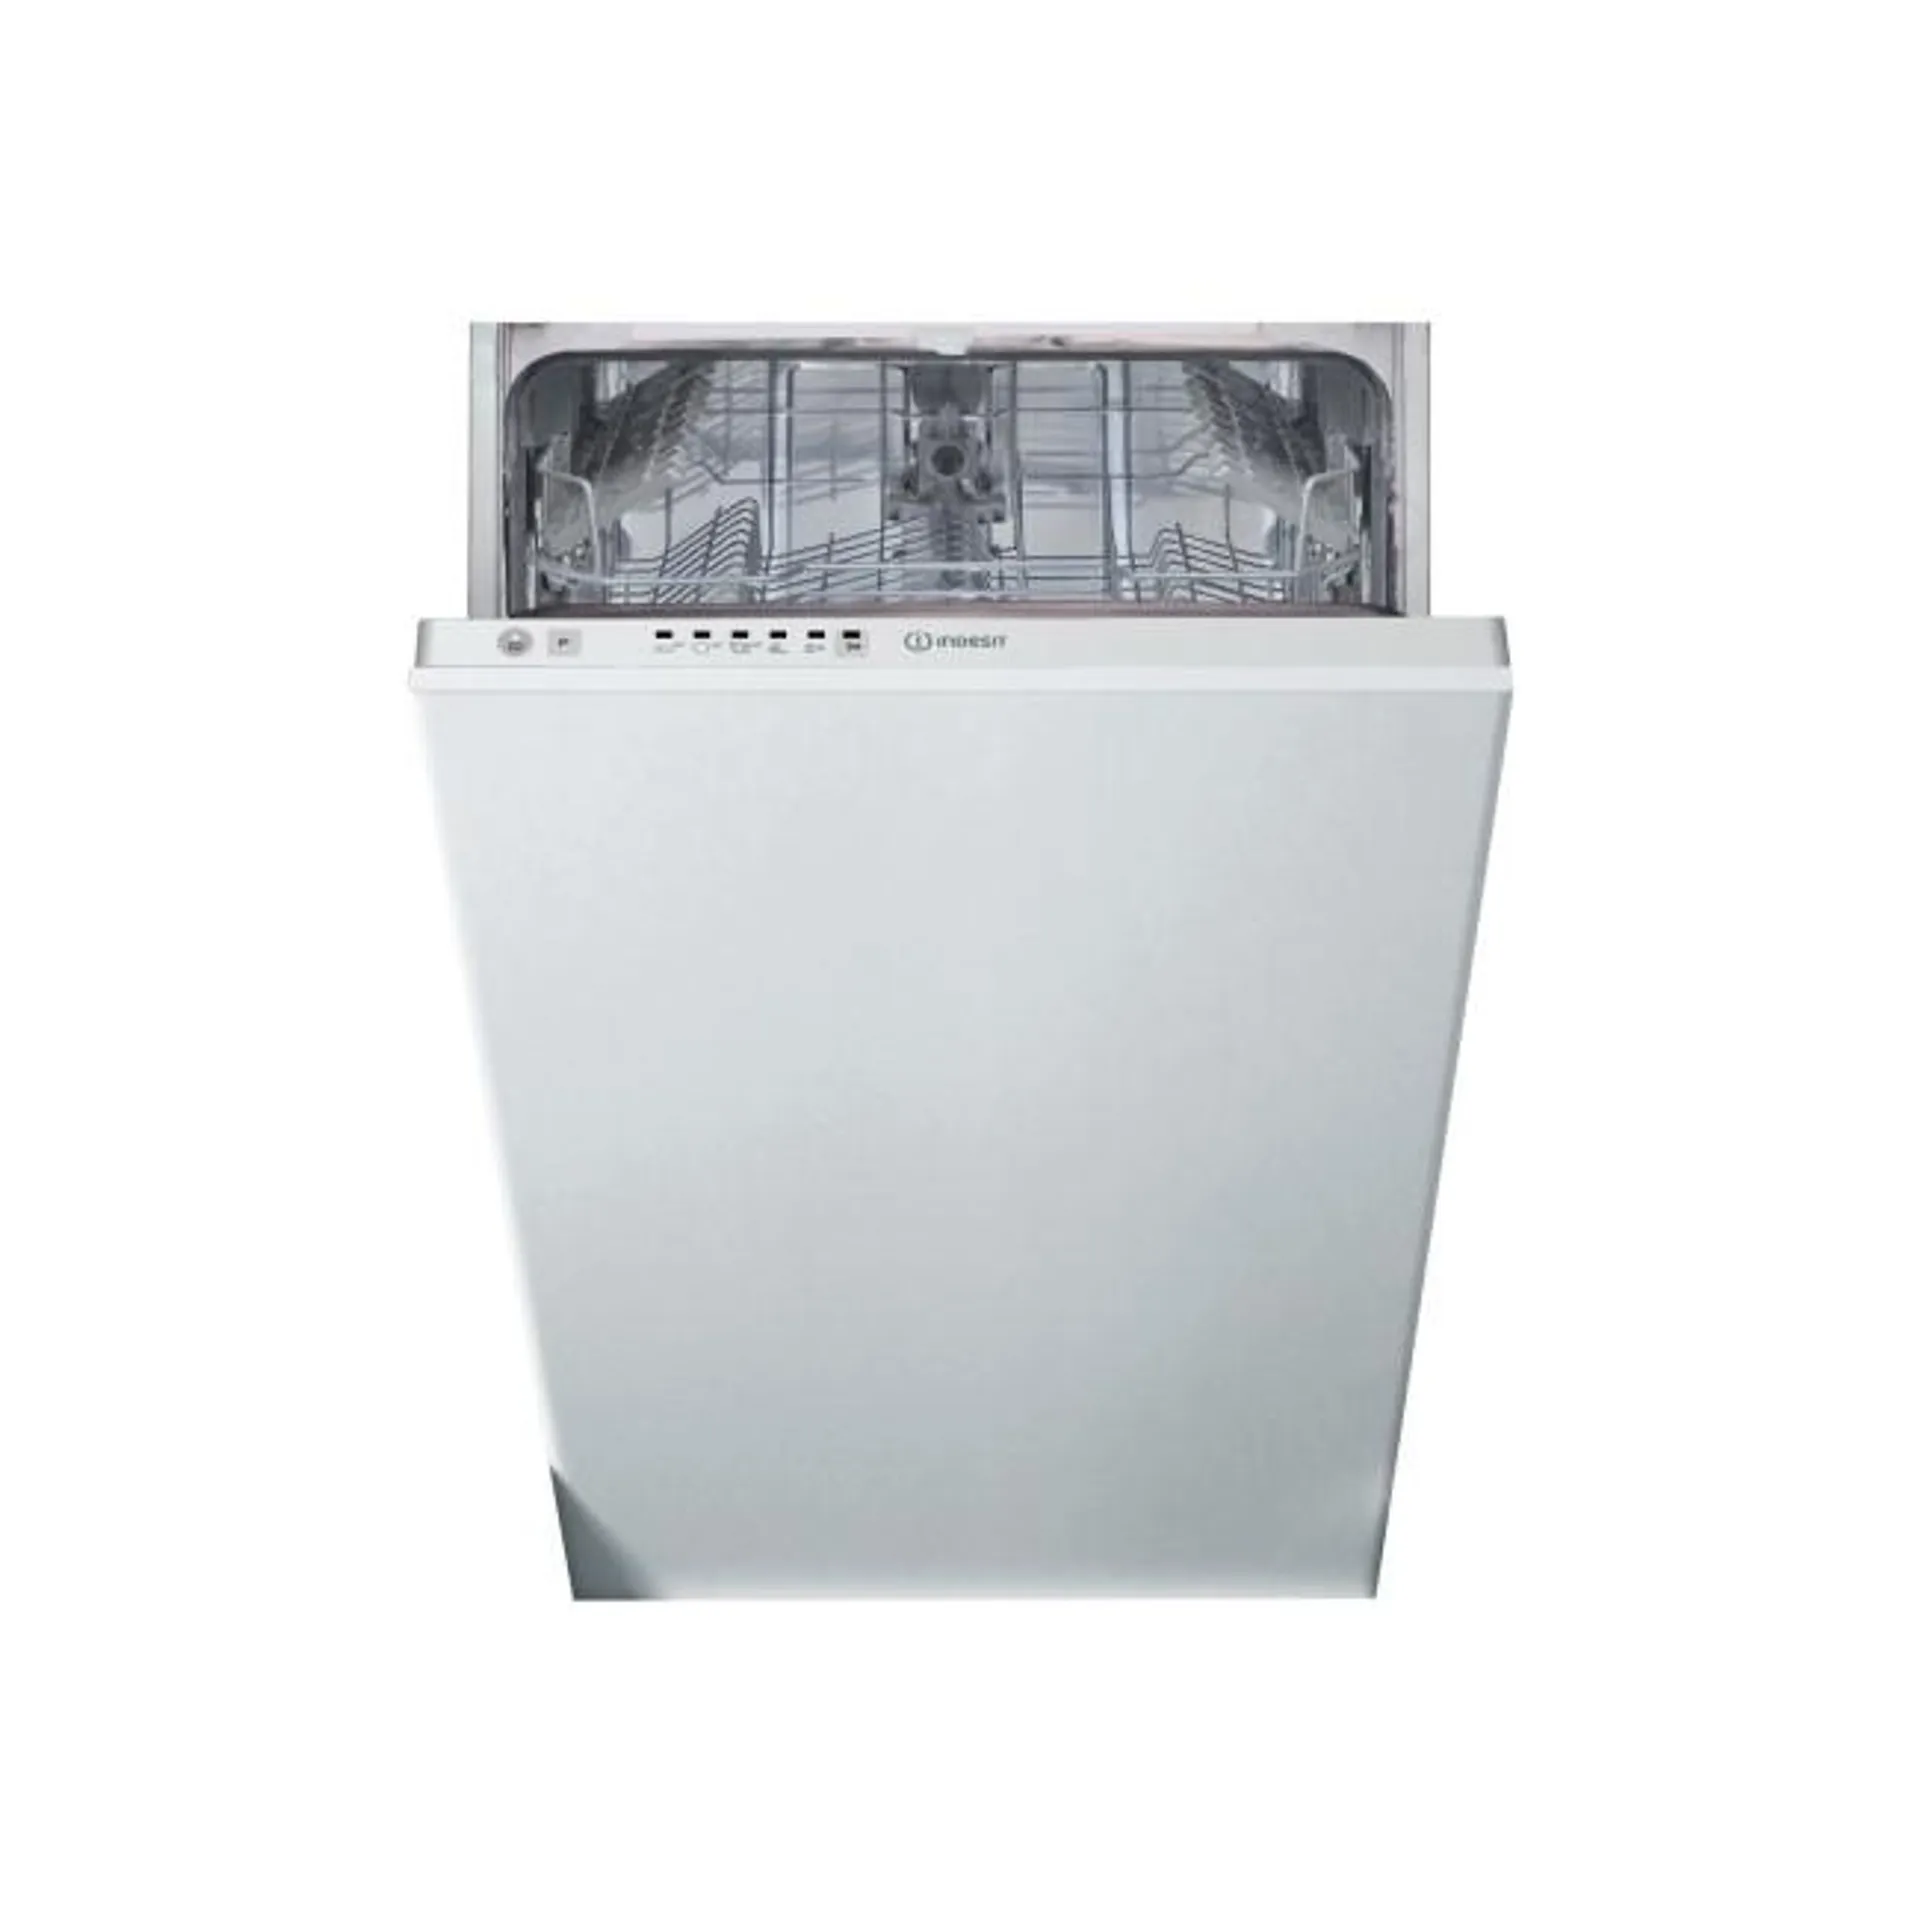 Indesit 10 Place Settings Fully Integrated Dishwasher